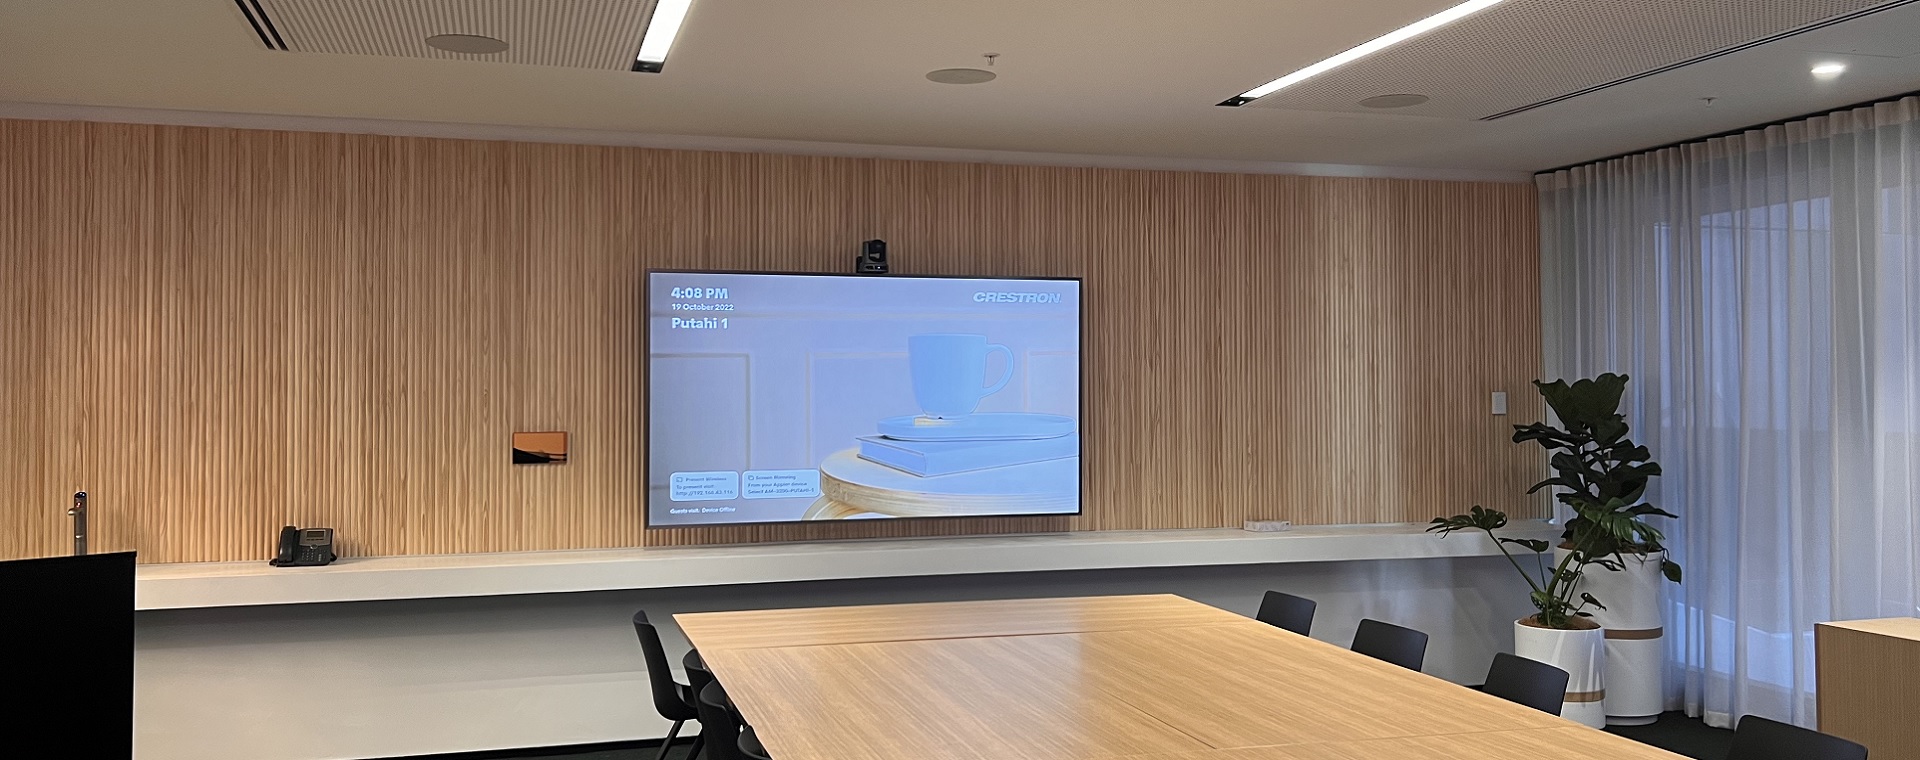 Generator Bowen Campus boardroom set up with commercial display and camera for video conferencing as well as in-ceiling speakers